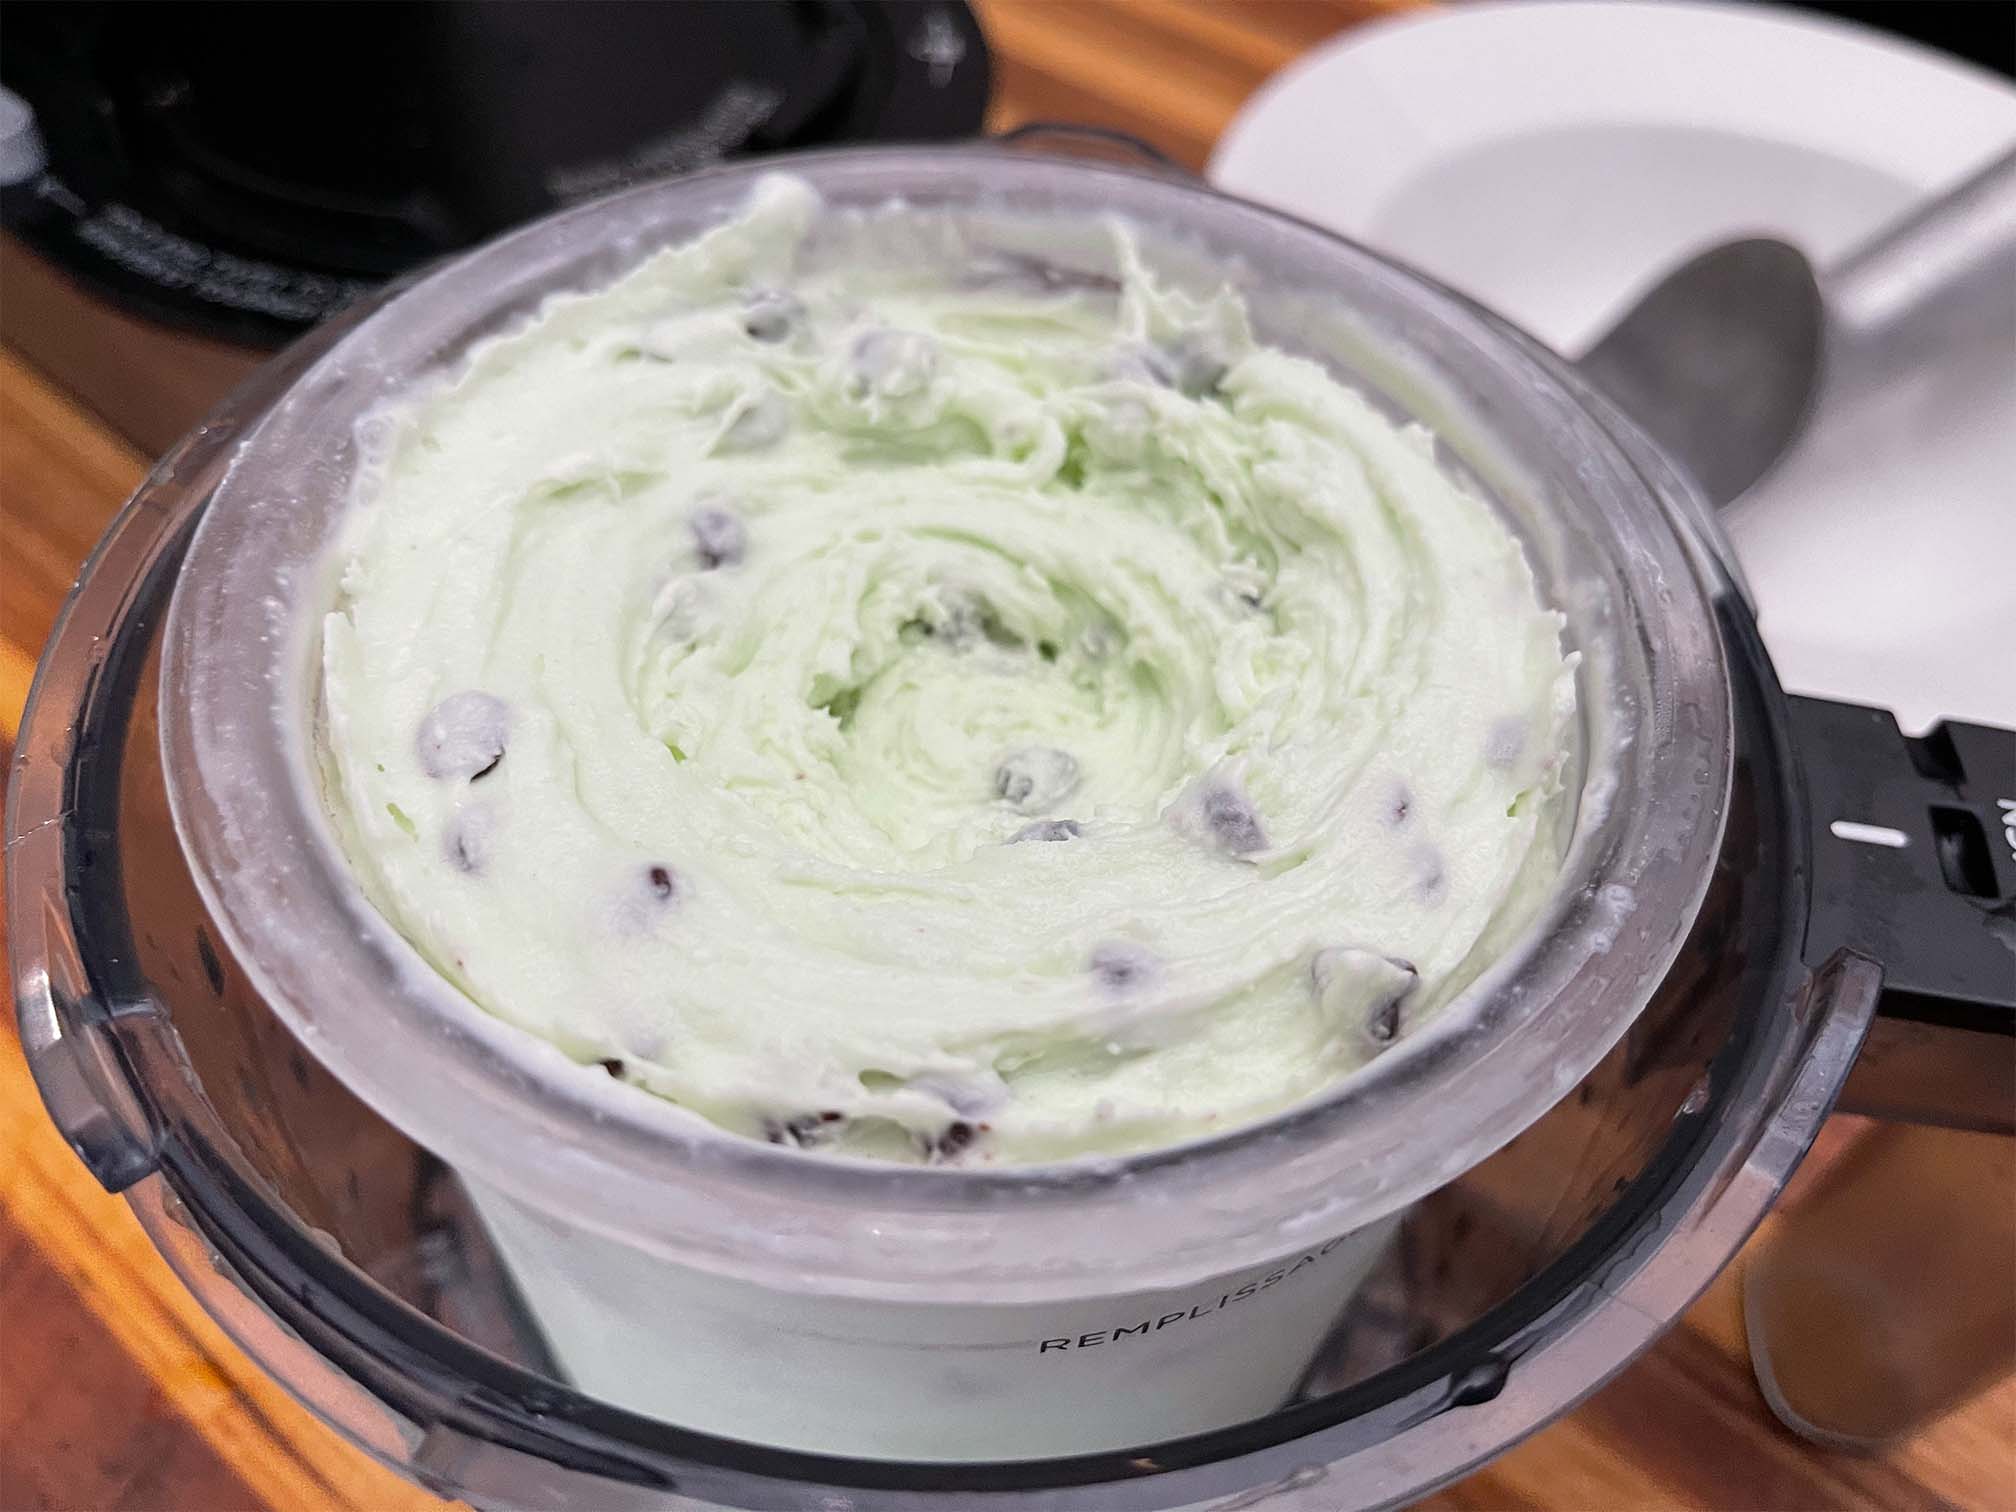 https://www.sizzleandsear.com/wp-content/uploads/2021/12/ninja-creami-review-mint-chocolate-chip-mixins-ice-cream.jpg